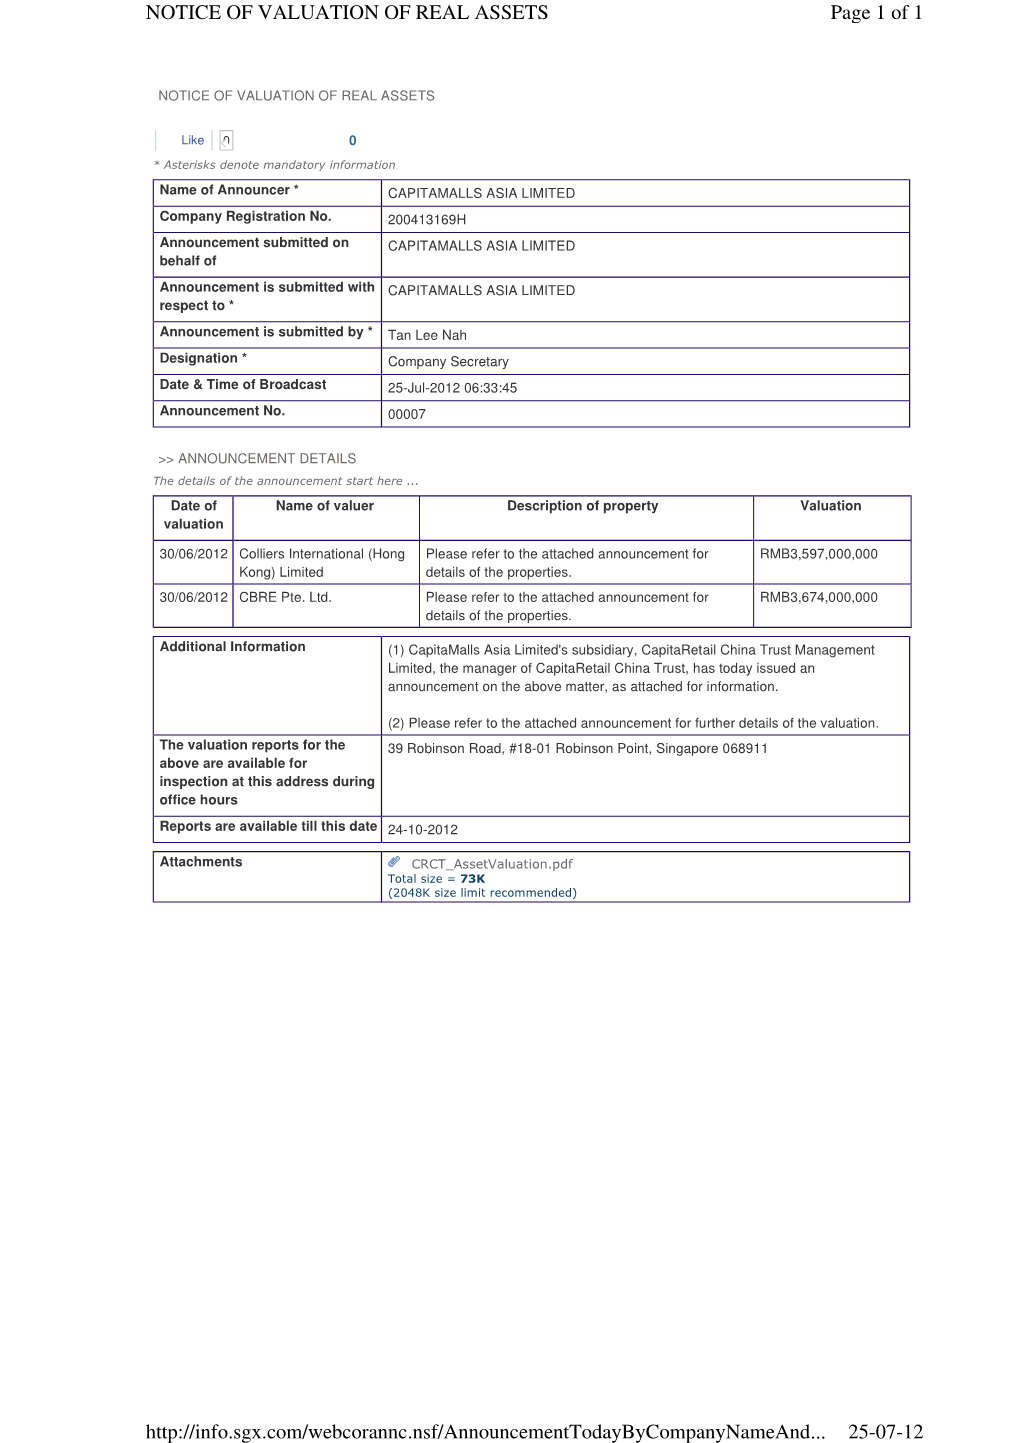 Page 1 of 1 NOTICE of VALUATION of REAL ASSETS 25-07-12 Http